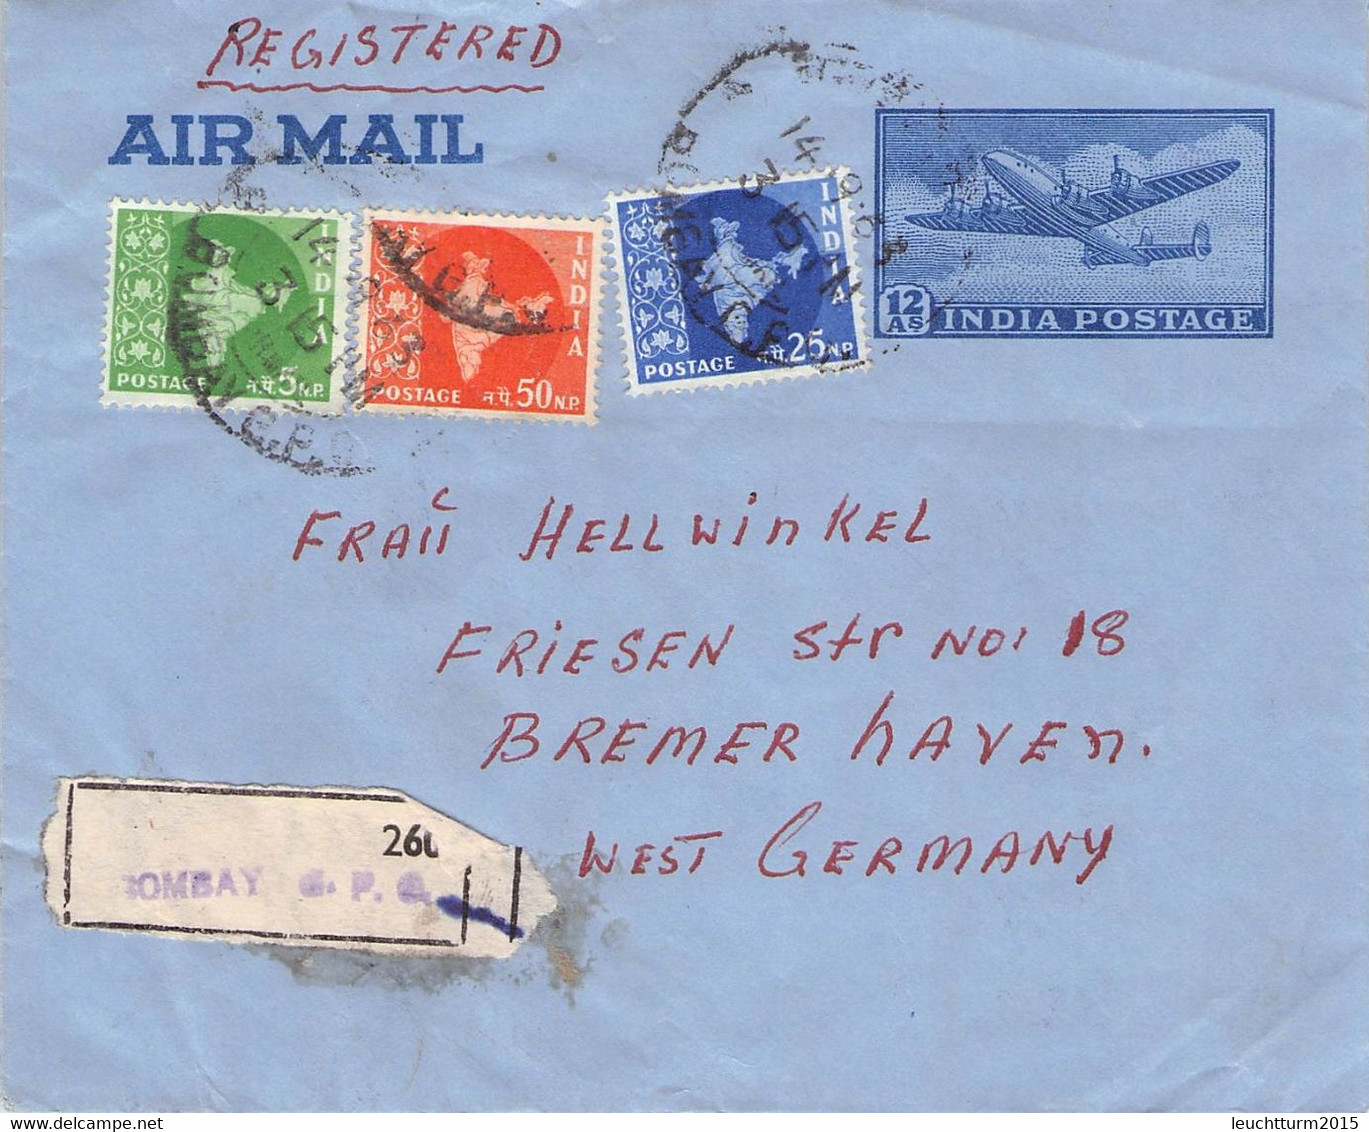 INDIA - AIRMAIL 1963 BOMBAY > BREMERHAVEN/GEERMANY /G114 - Luchtpost